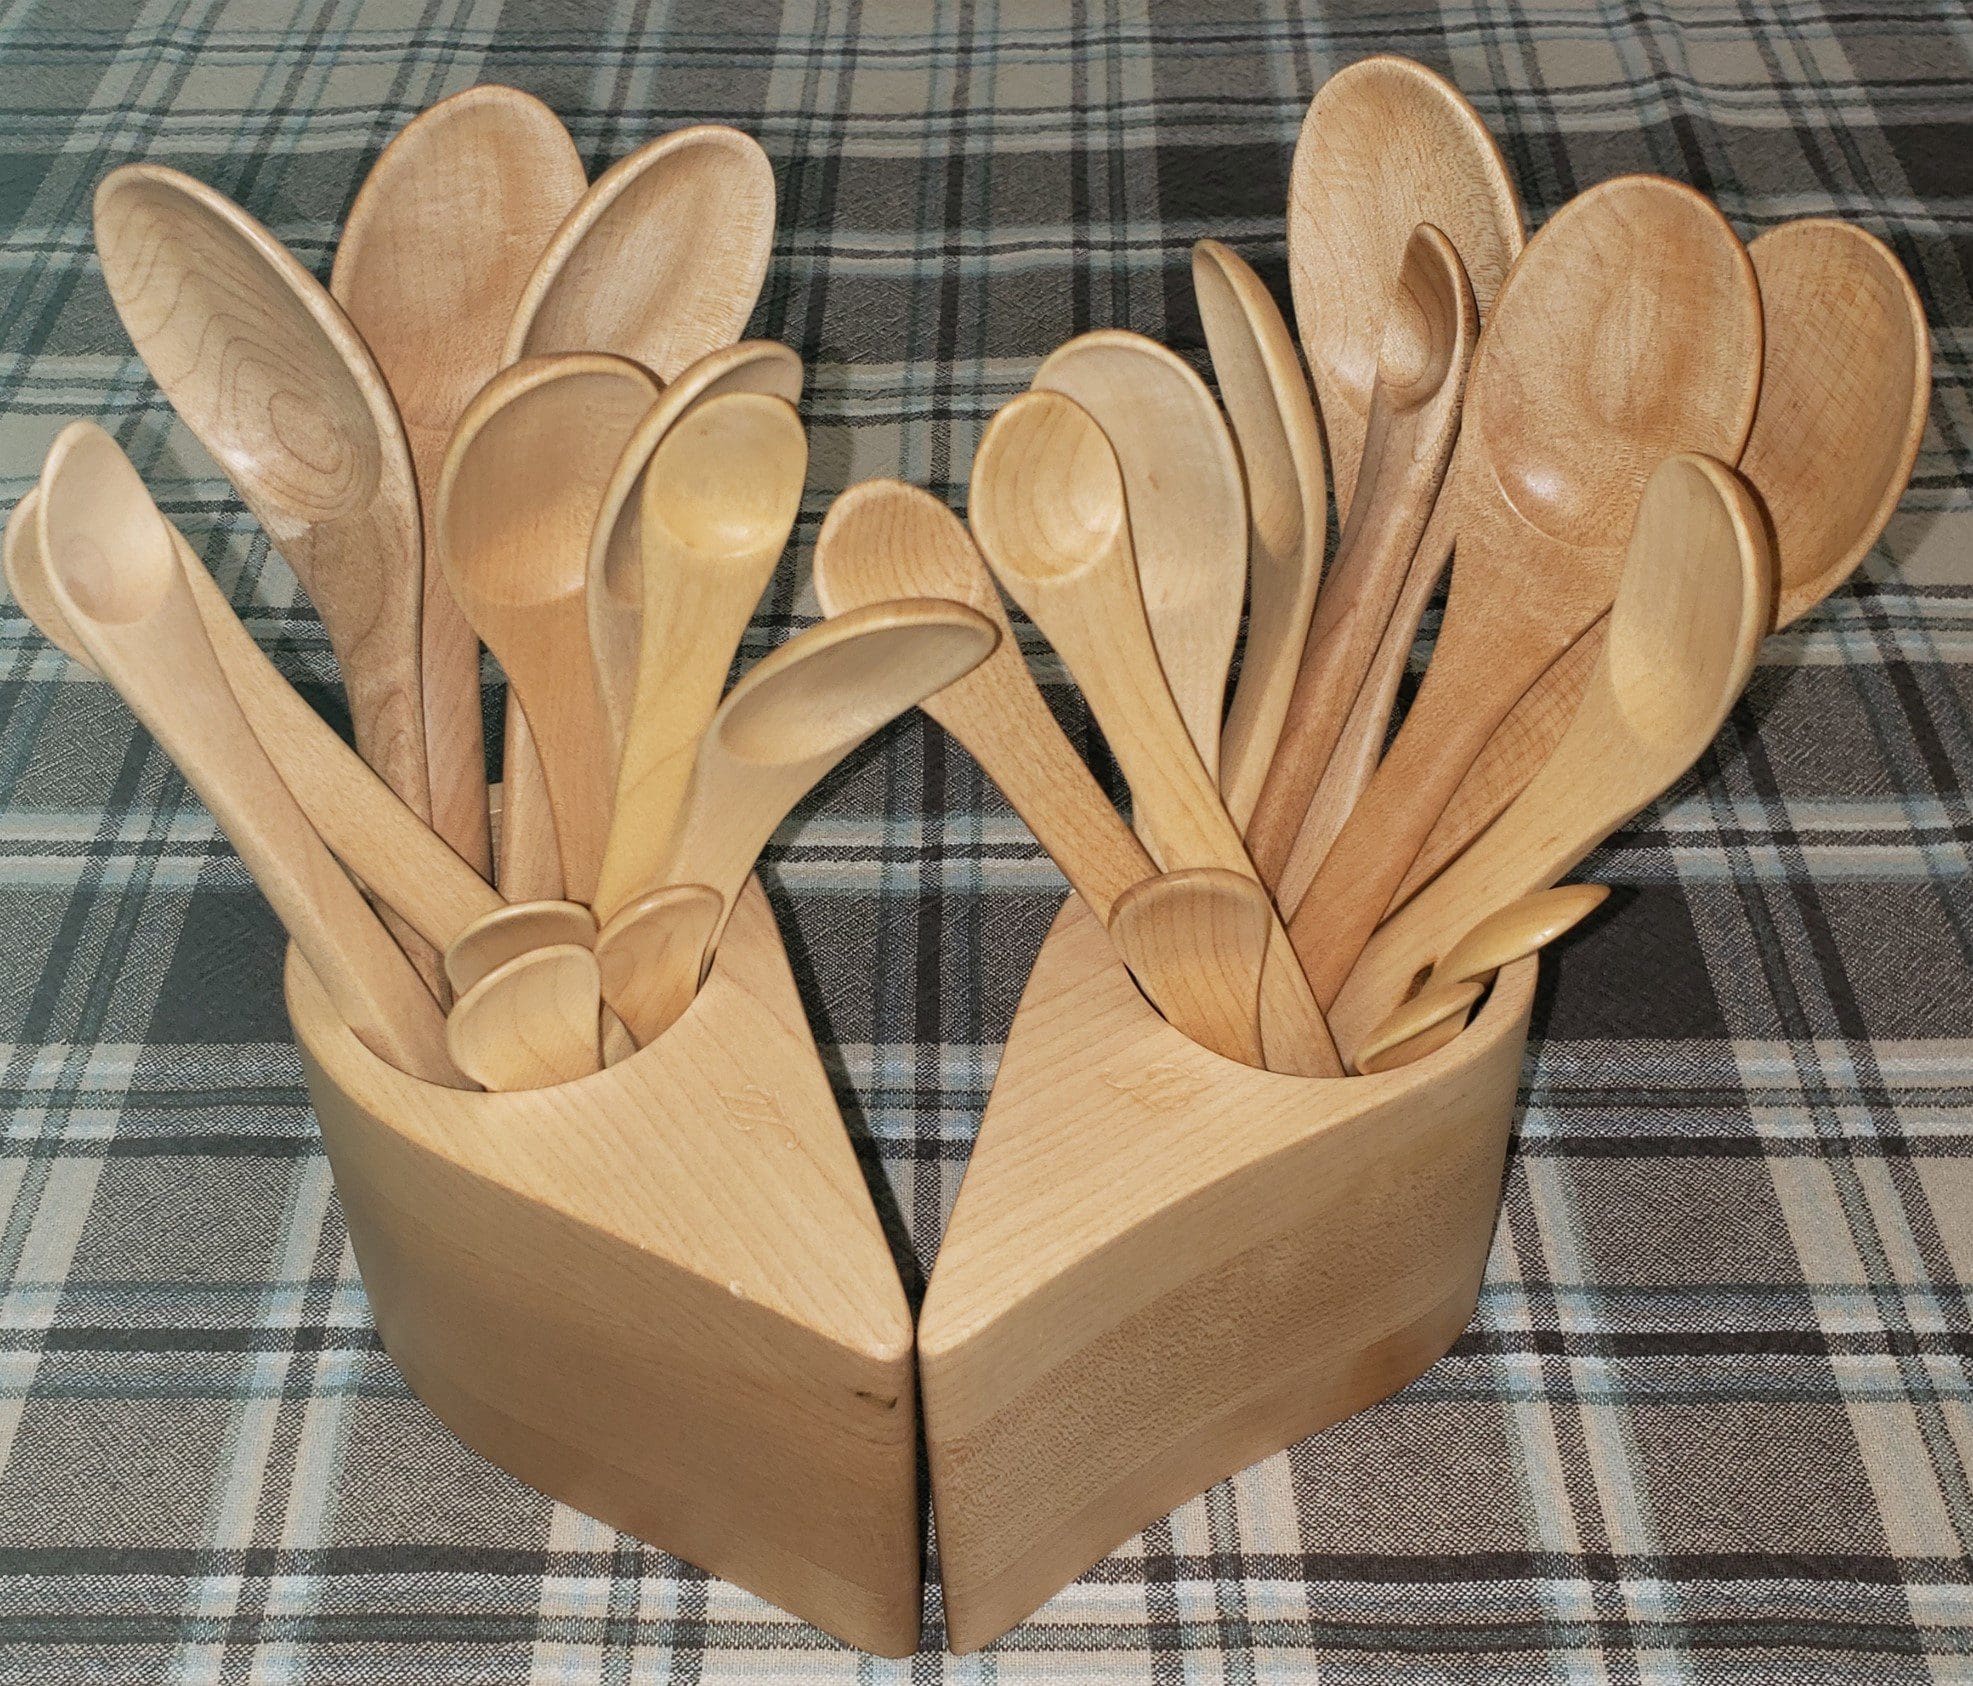 10 REASONS WHY WOODEN SPOONS ARE GREAT